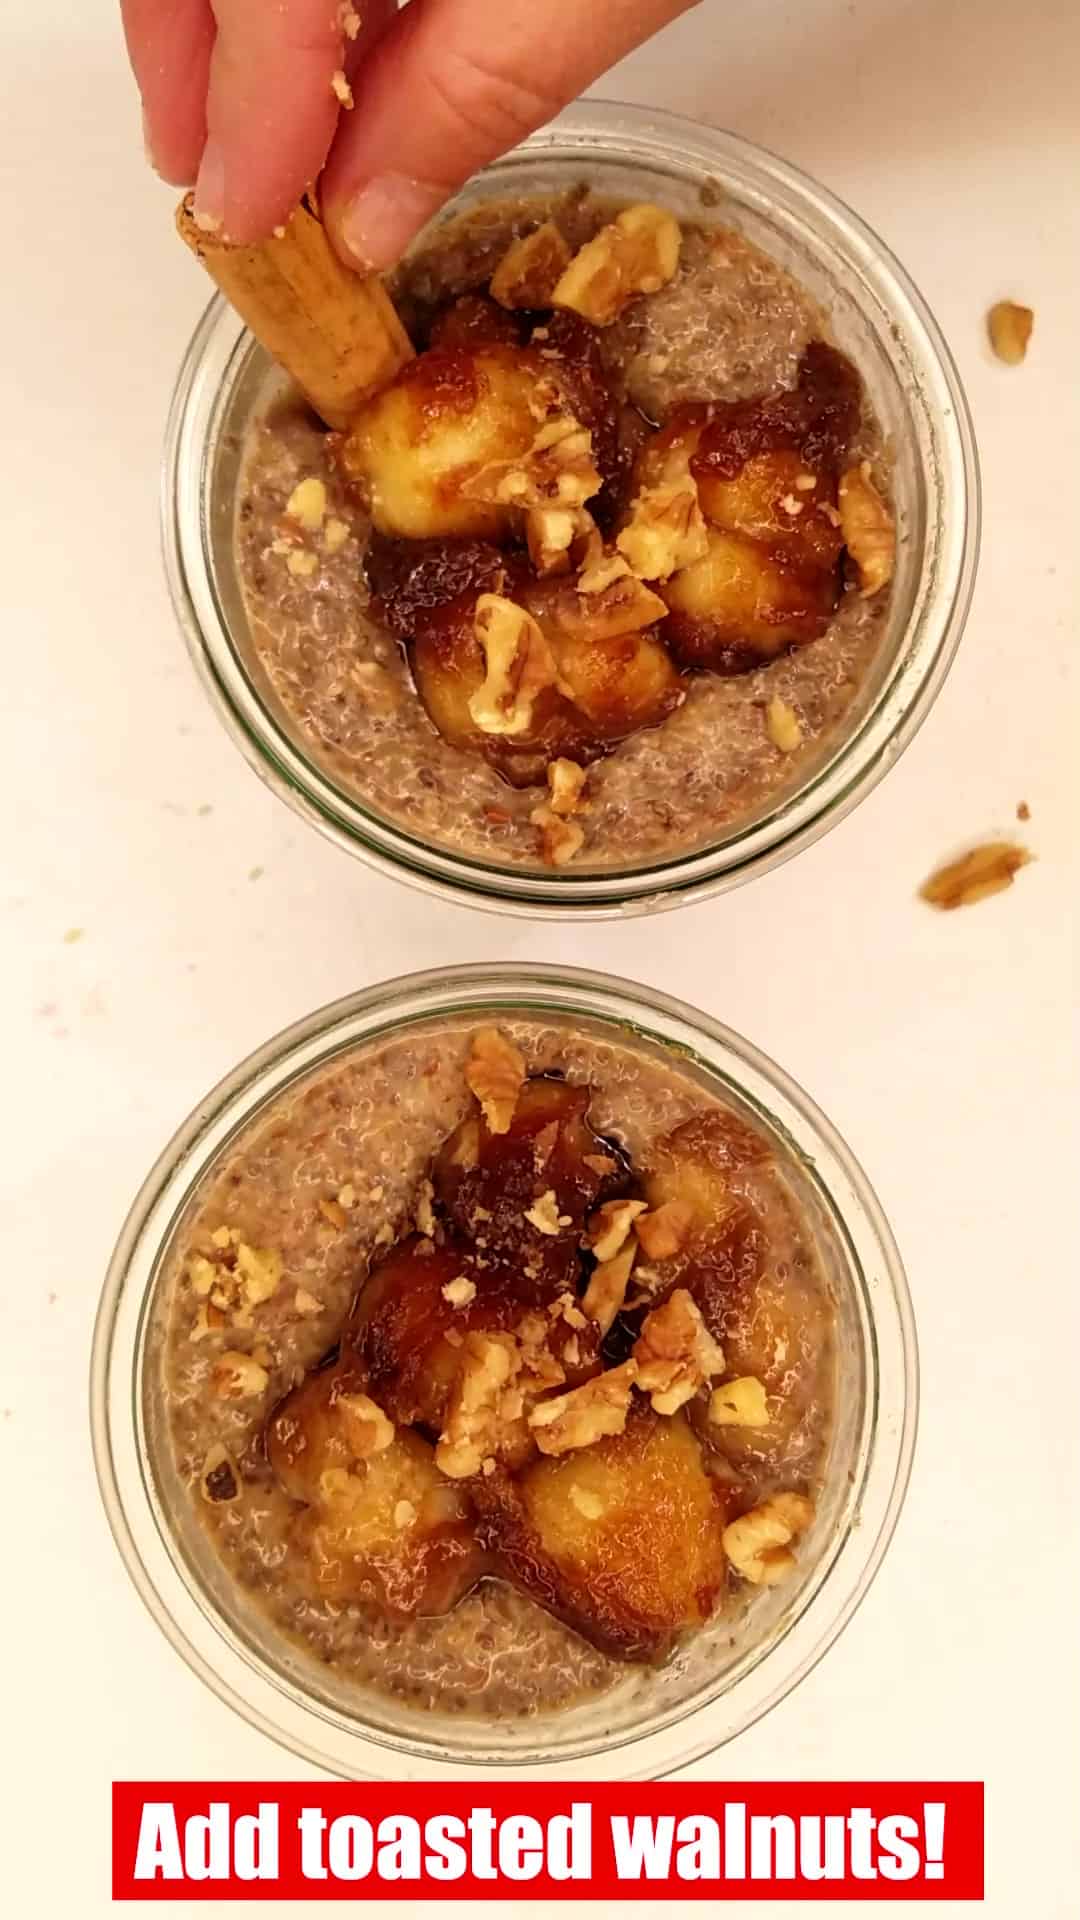 Topping the banana chia seed pudding with chopped walnuts.